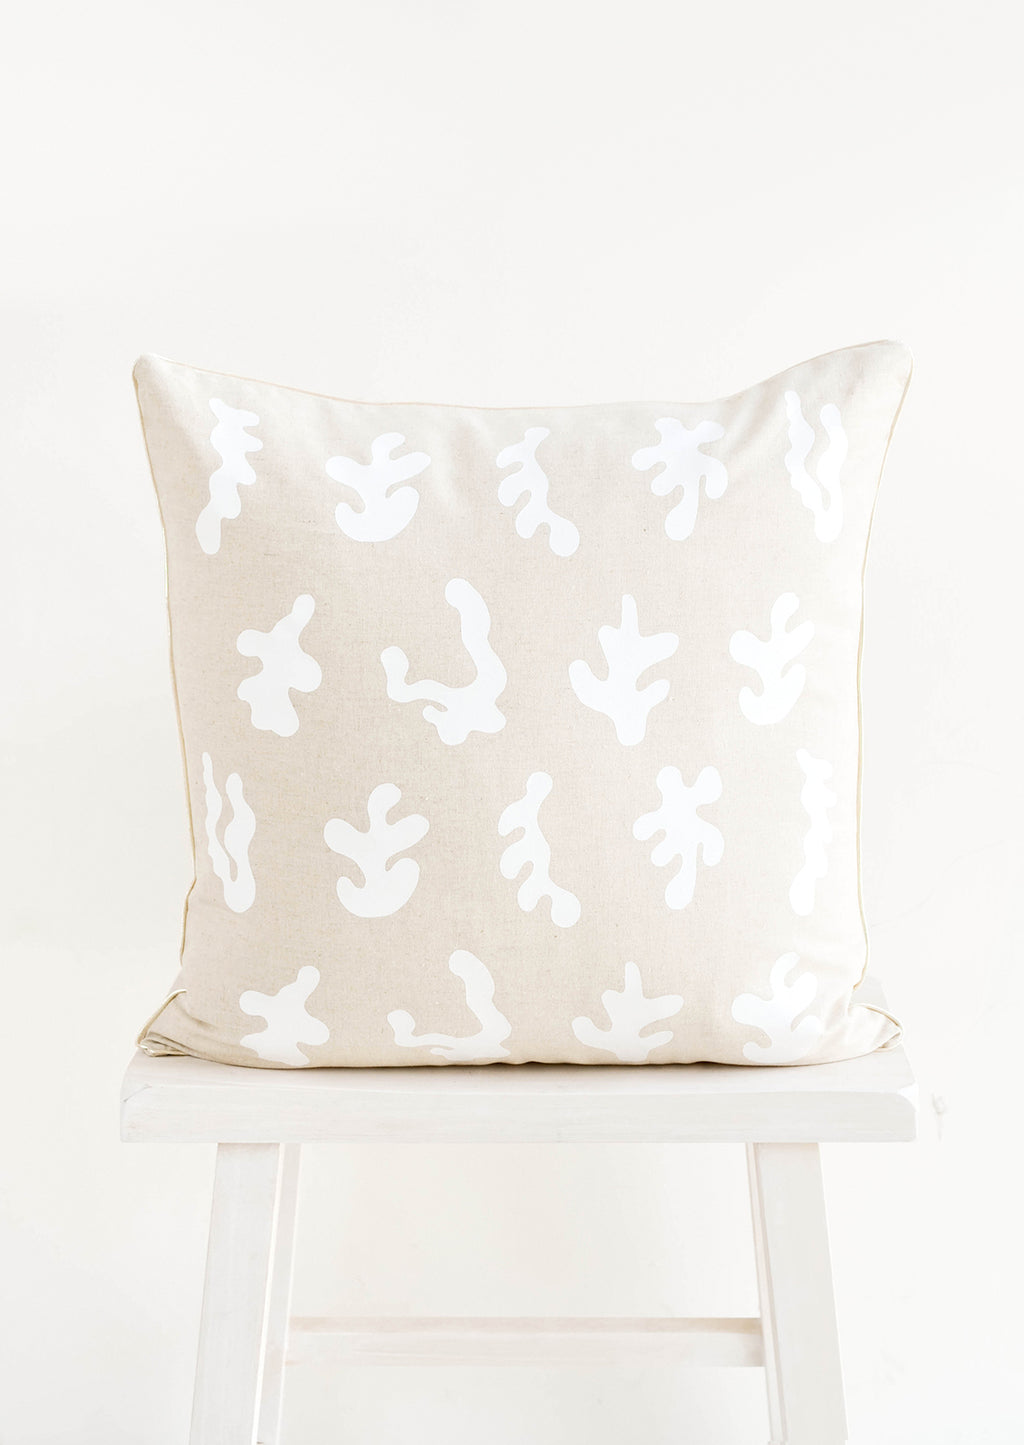 1: Square throw pillow in natural linen color with white, screen printed seaweed shapes 